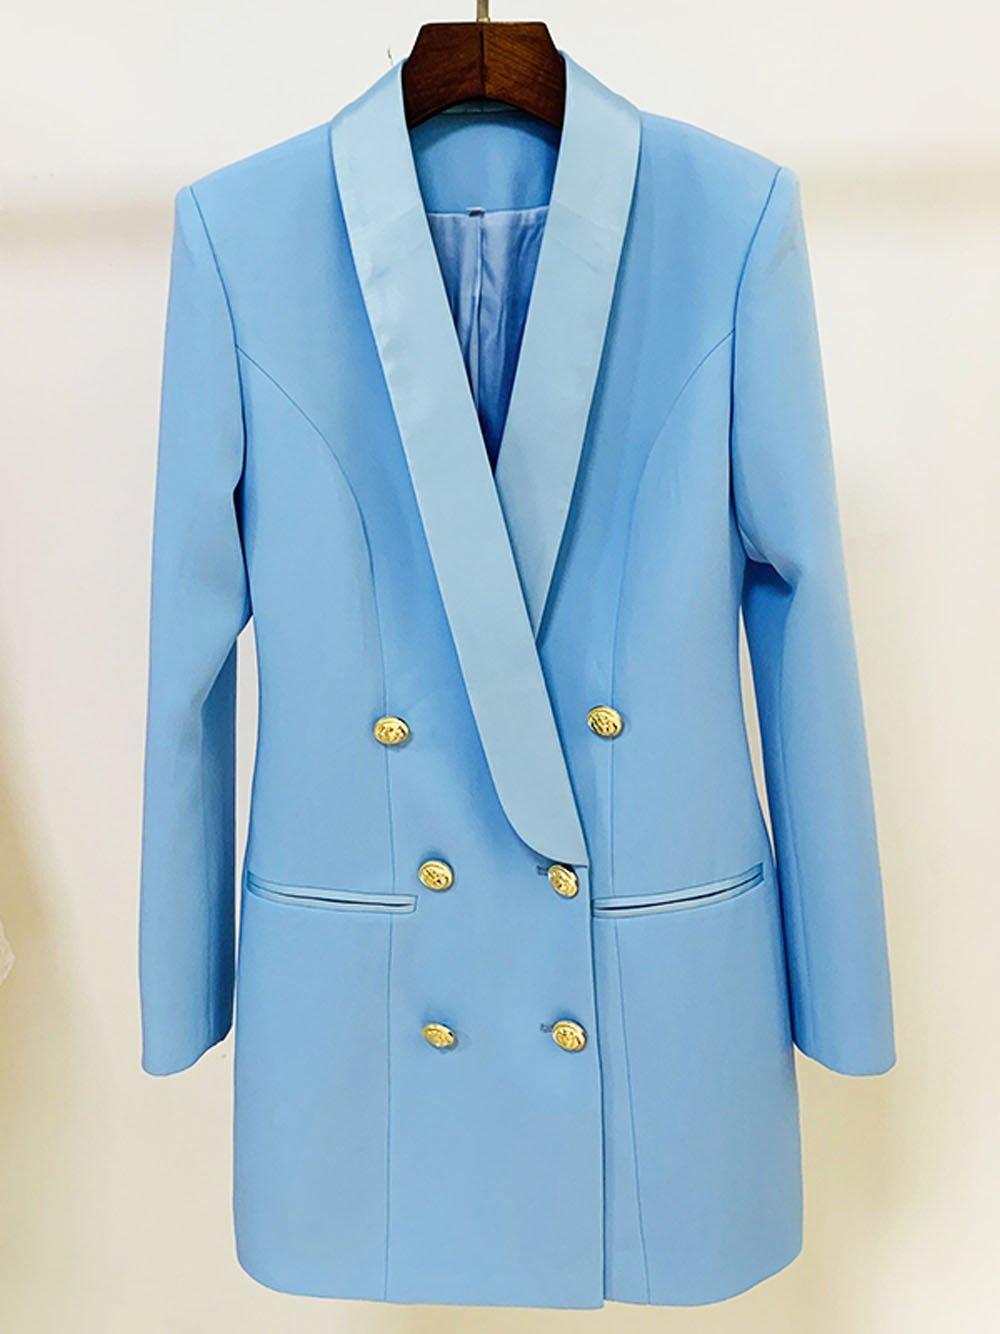 Double Breasted Long Blazer in Light Blue